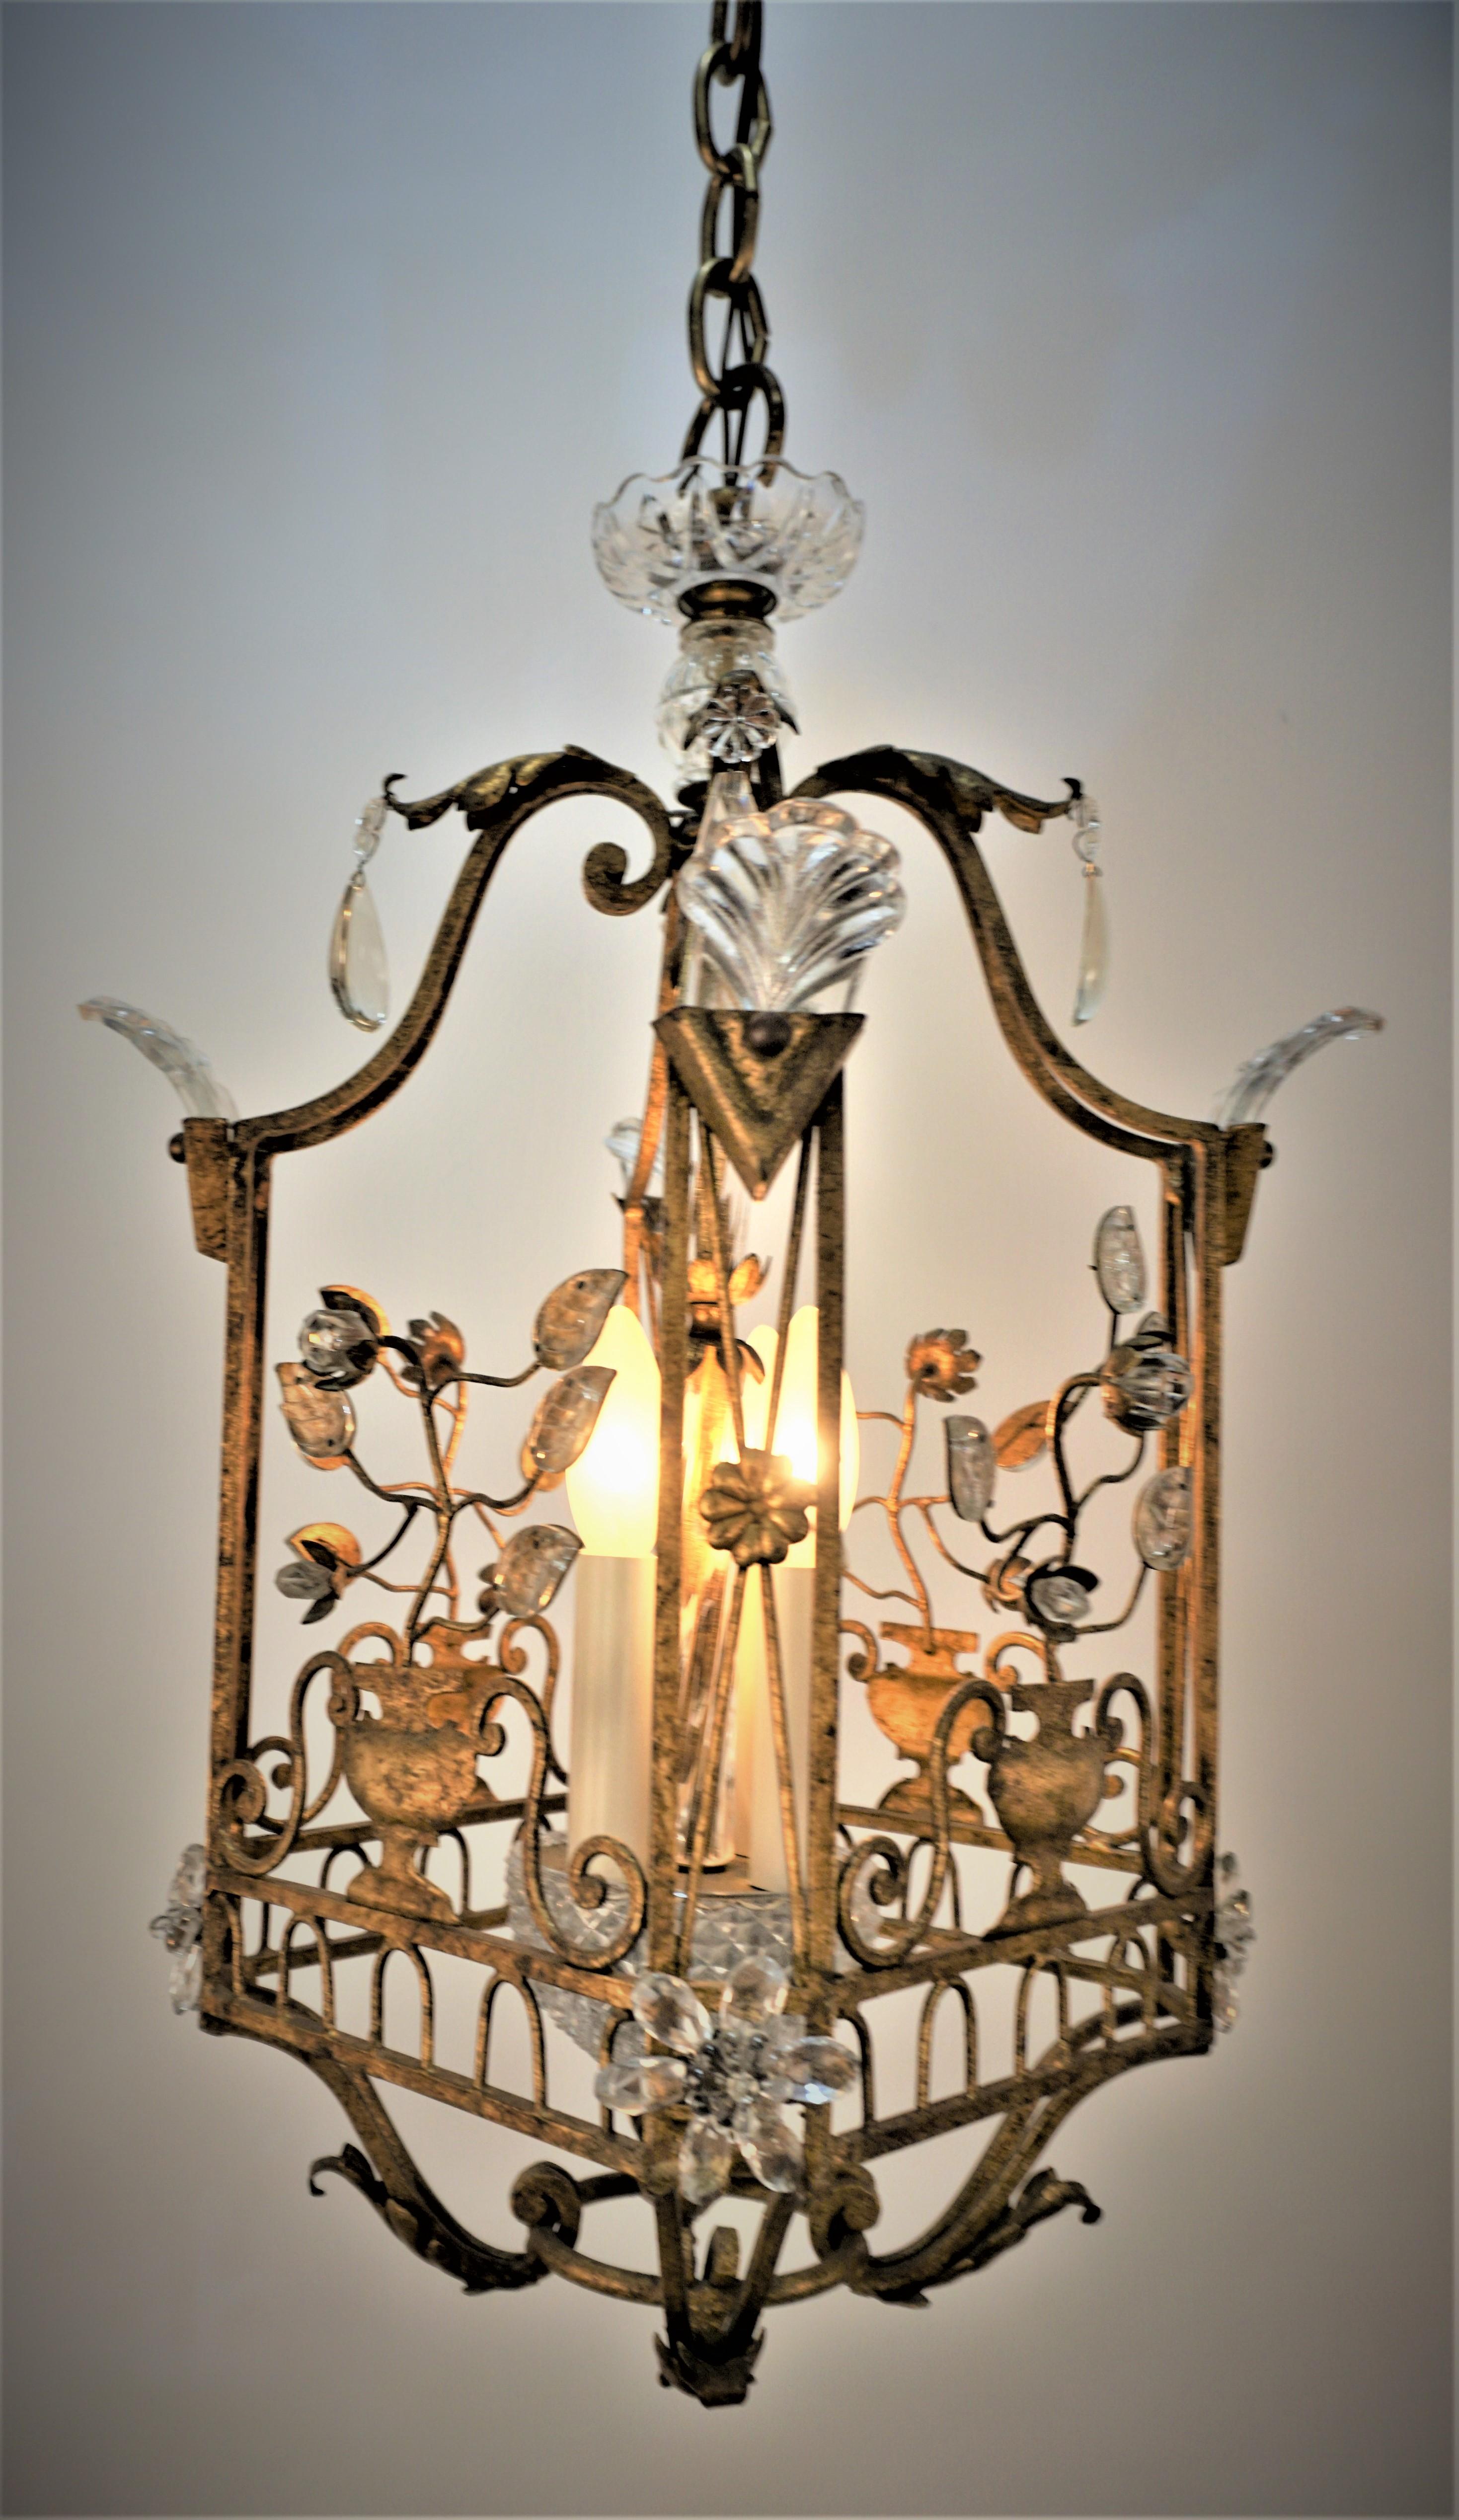 Gilt iron and crystal lantern / chandelier by the prestigious Maison Baguès.
Square four light handmade gilt bronze with crystal leaves and flora, beautiful piece of art. 
Measurement: 12